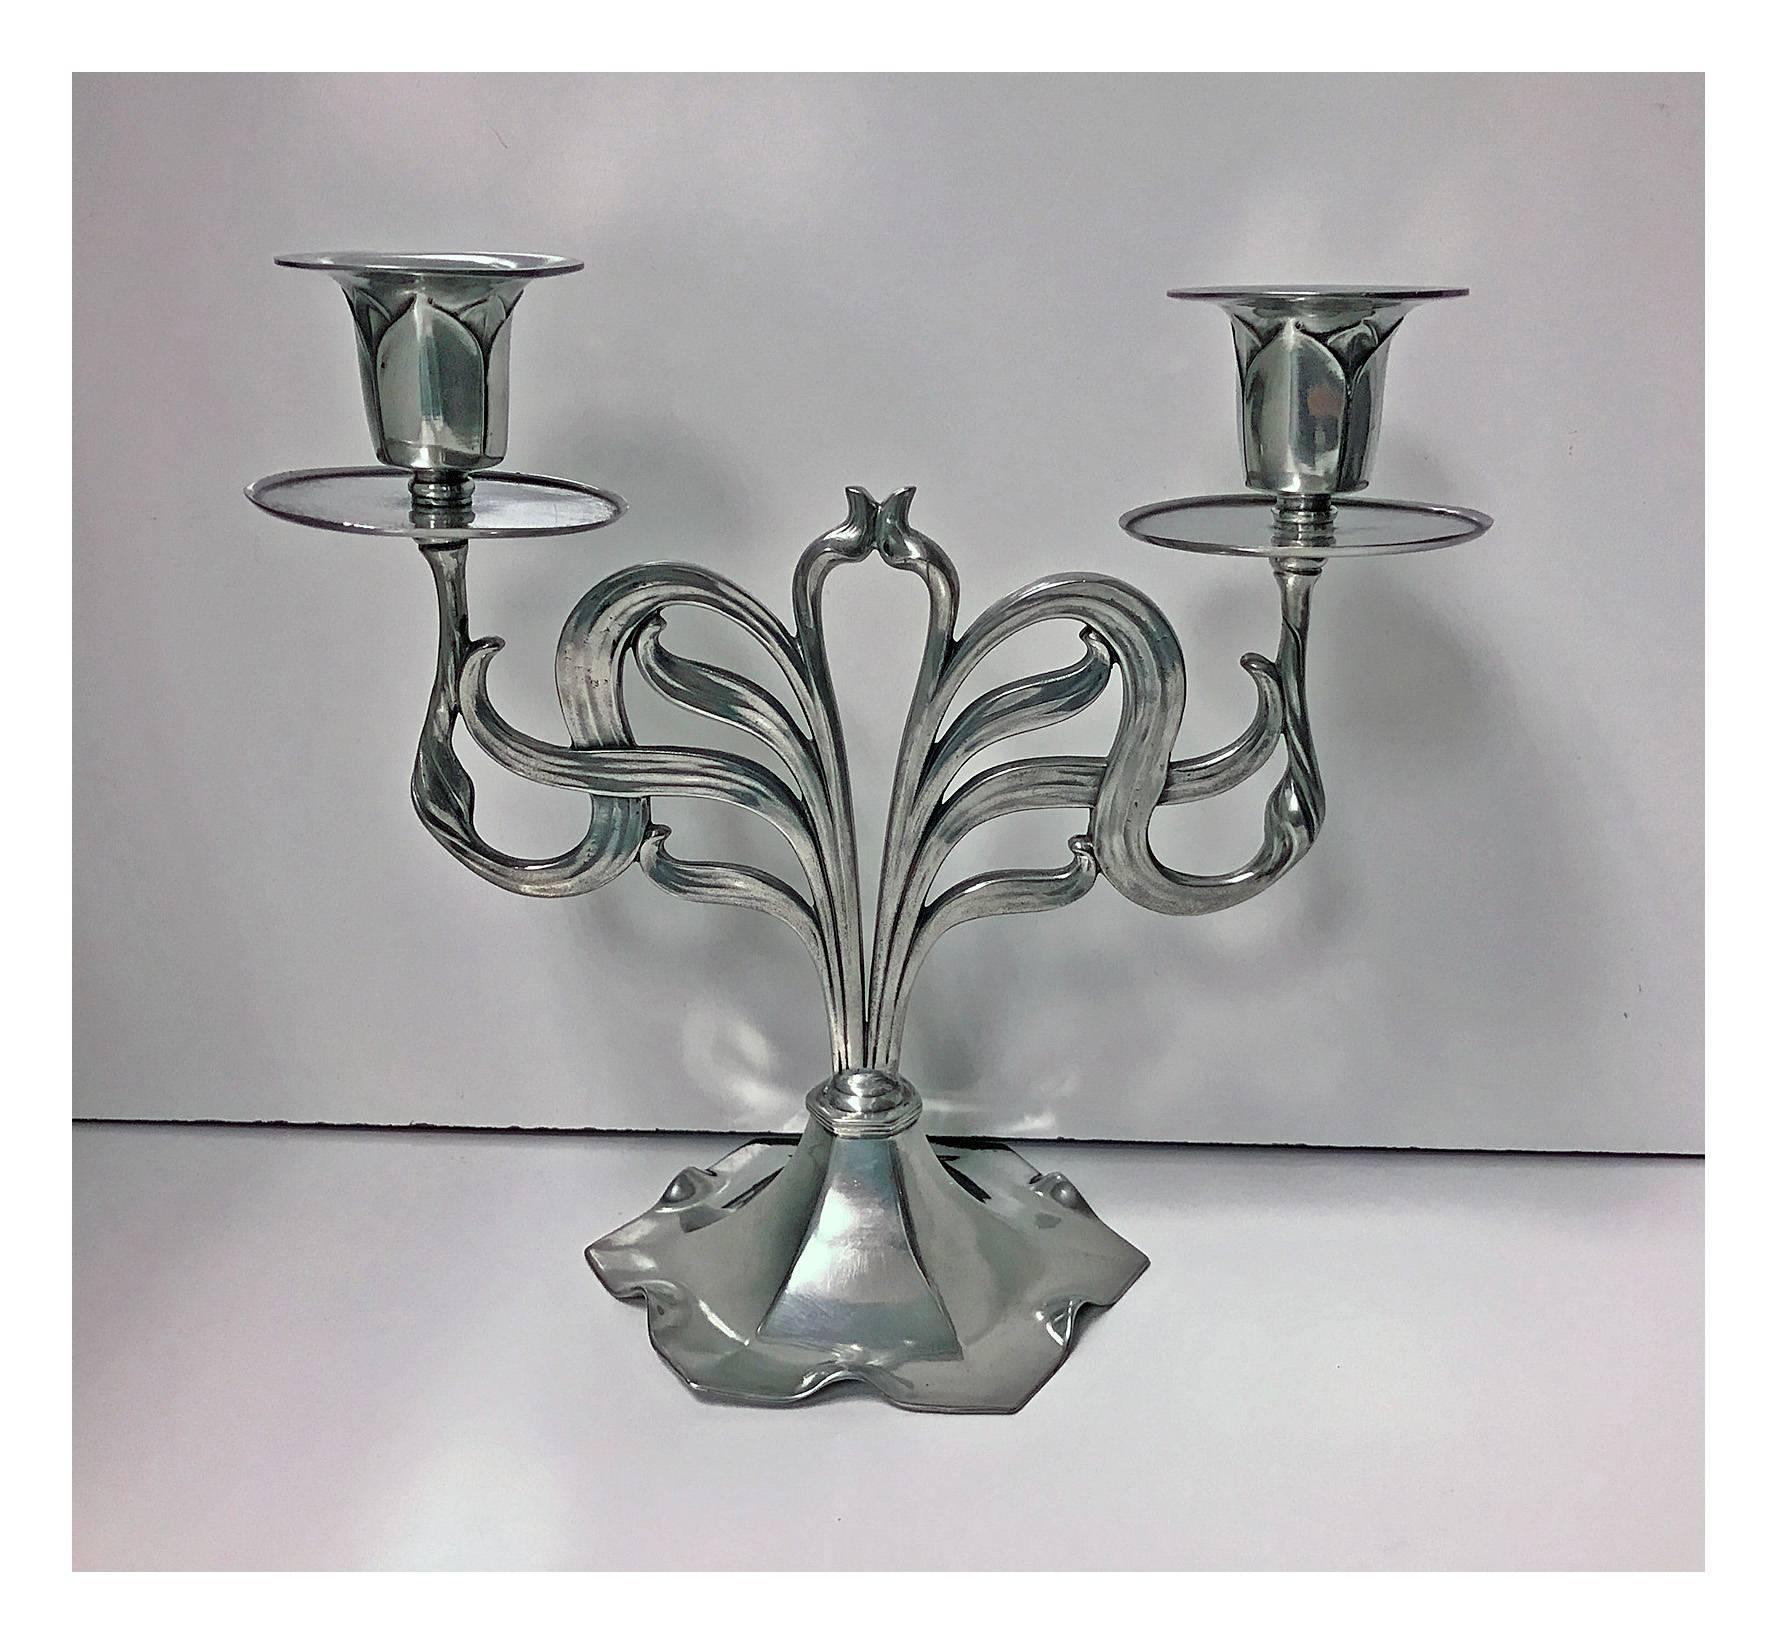 Orivit Jugendstil Secessionist Art Nouveau candelabra, Germany, circa 1900. The polished pewter candelabra each on crimped hexagonal base, supporting open stylised flowing organic foliate centres with detachable screw bobeche and sockets conforming